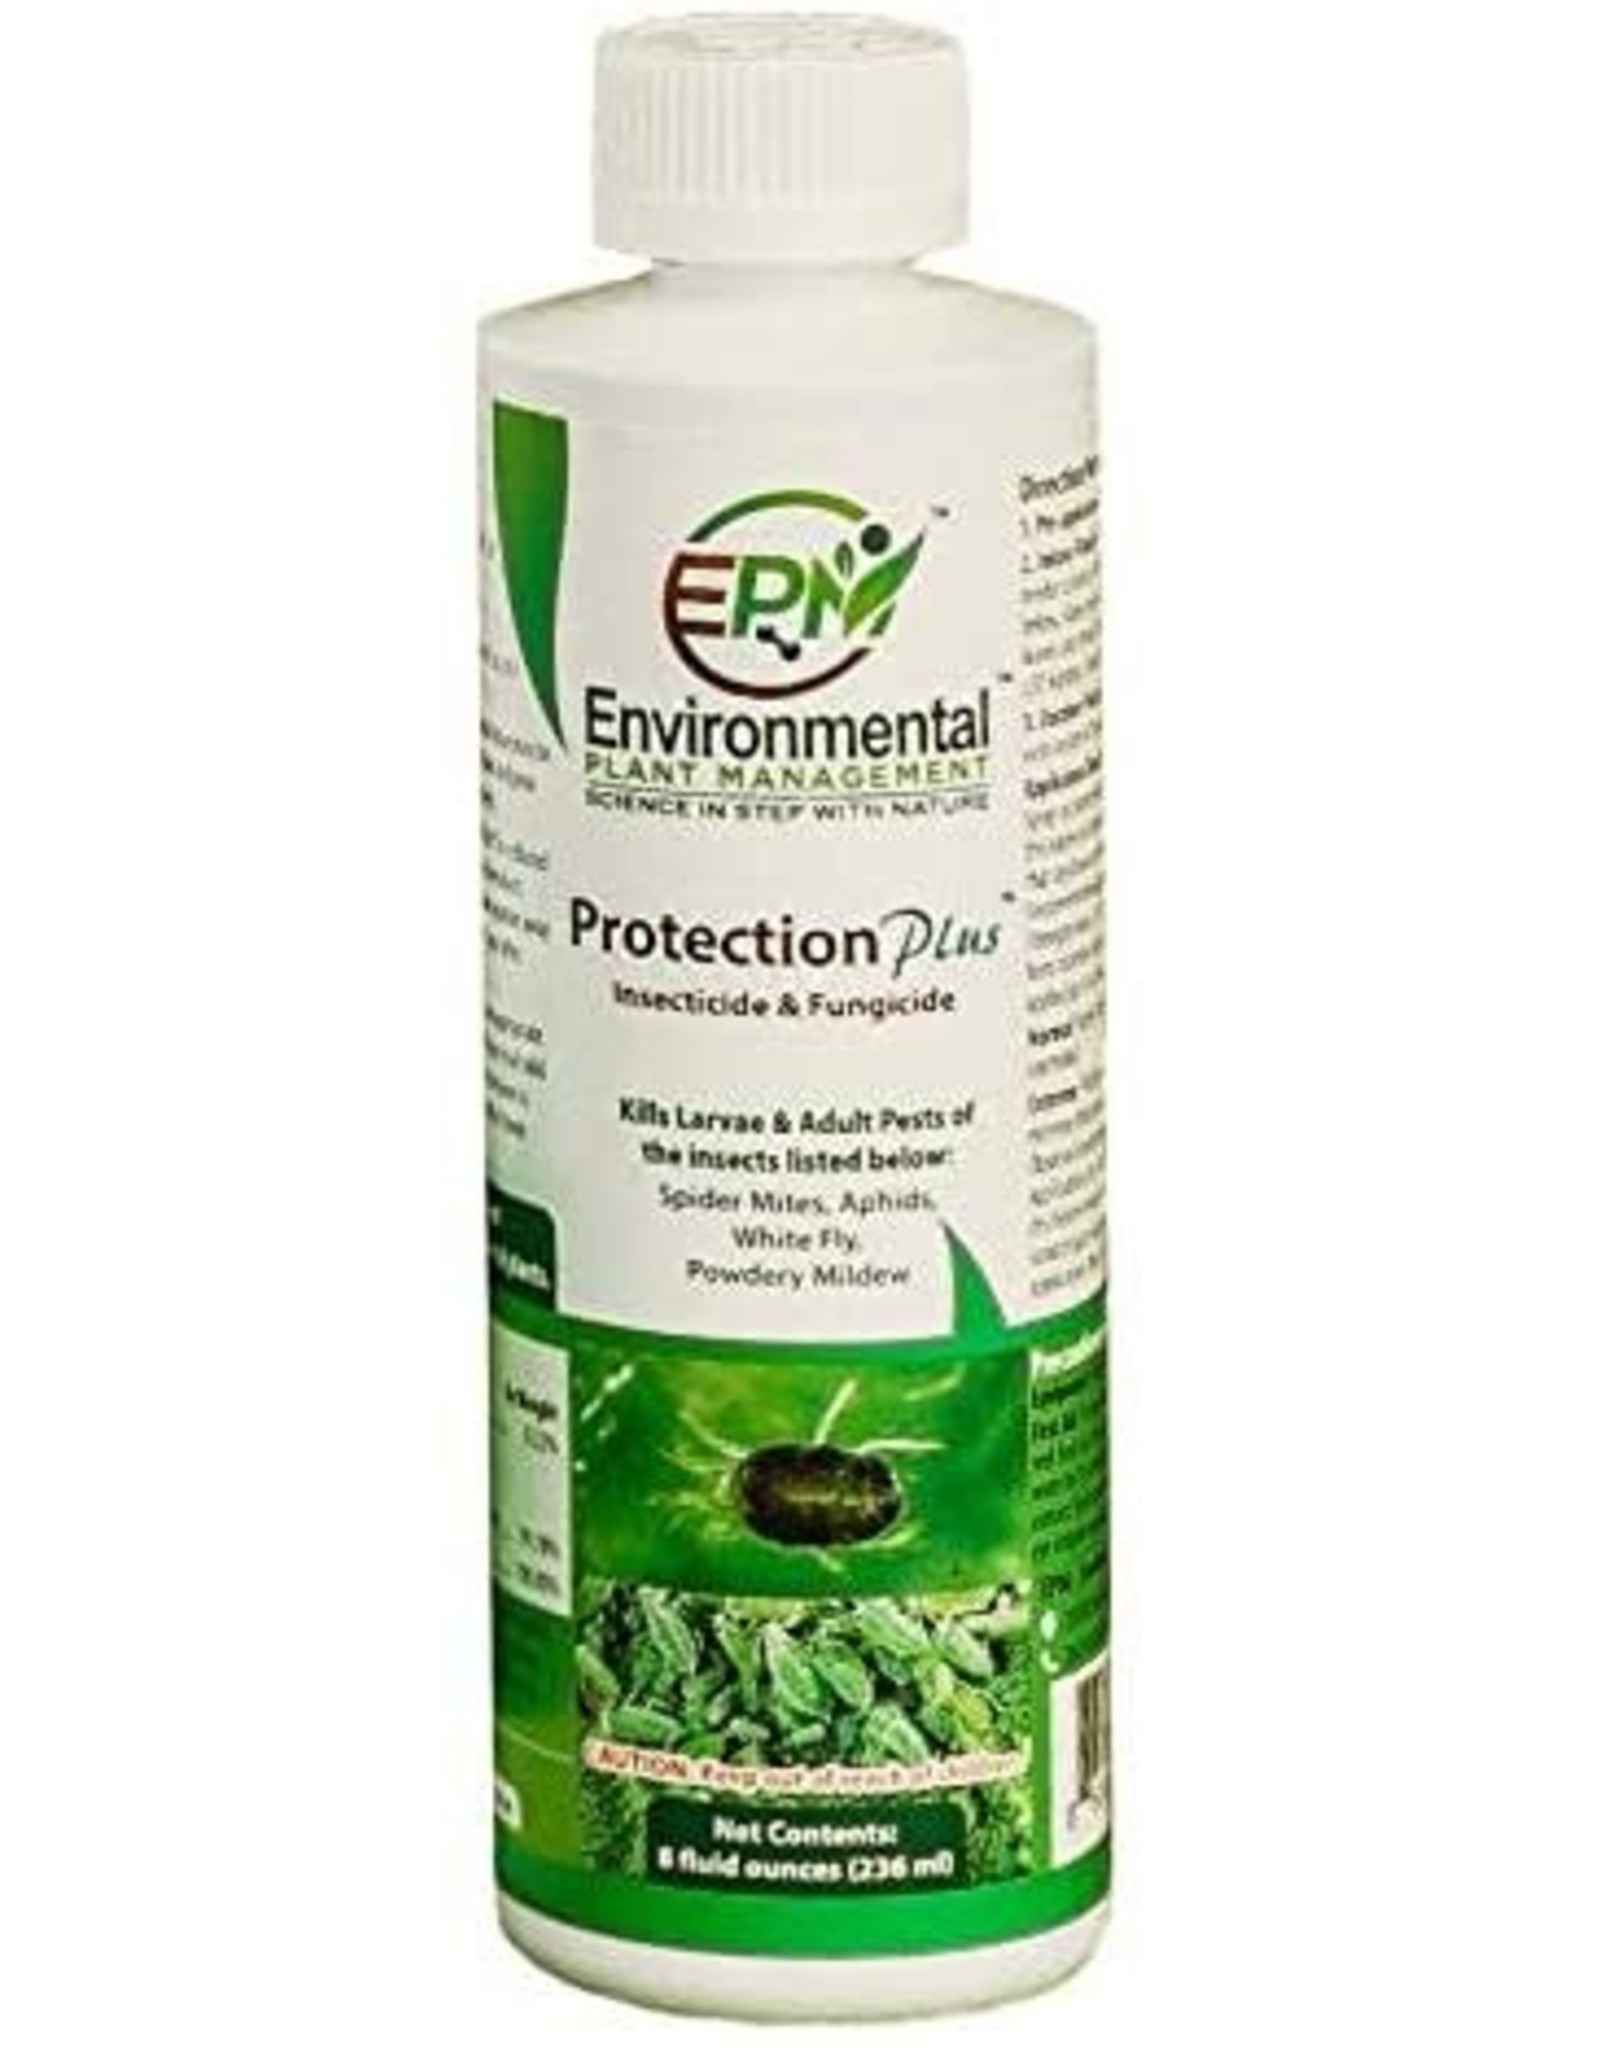 Environmental Plant Management Environmental Plant Management Protection Plus Insecticide and Fungicide 8oz